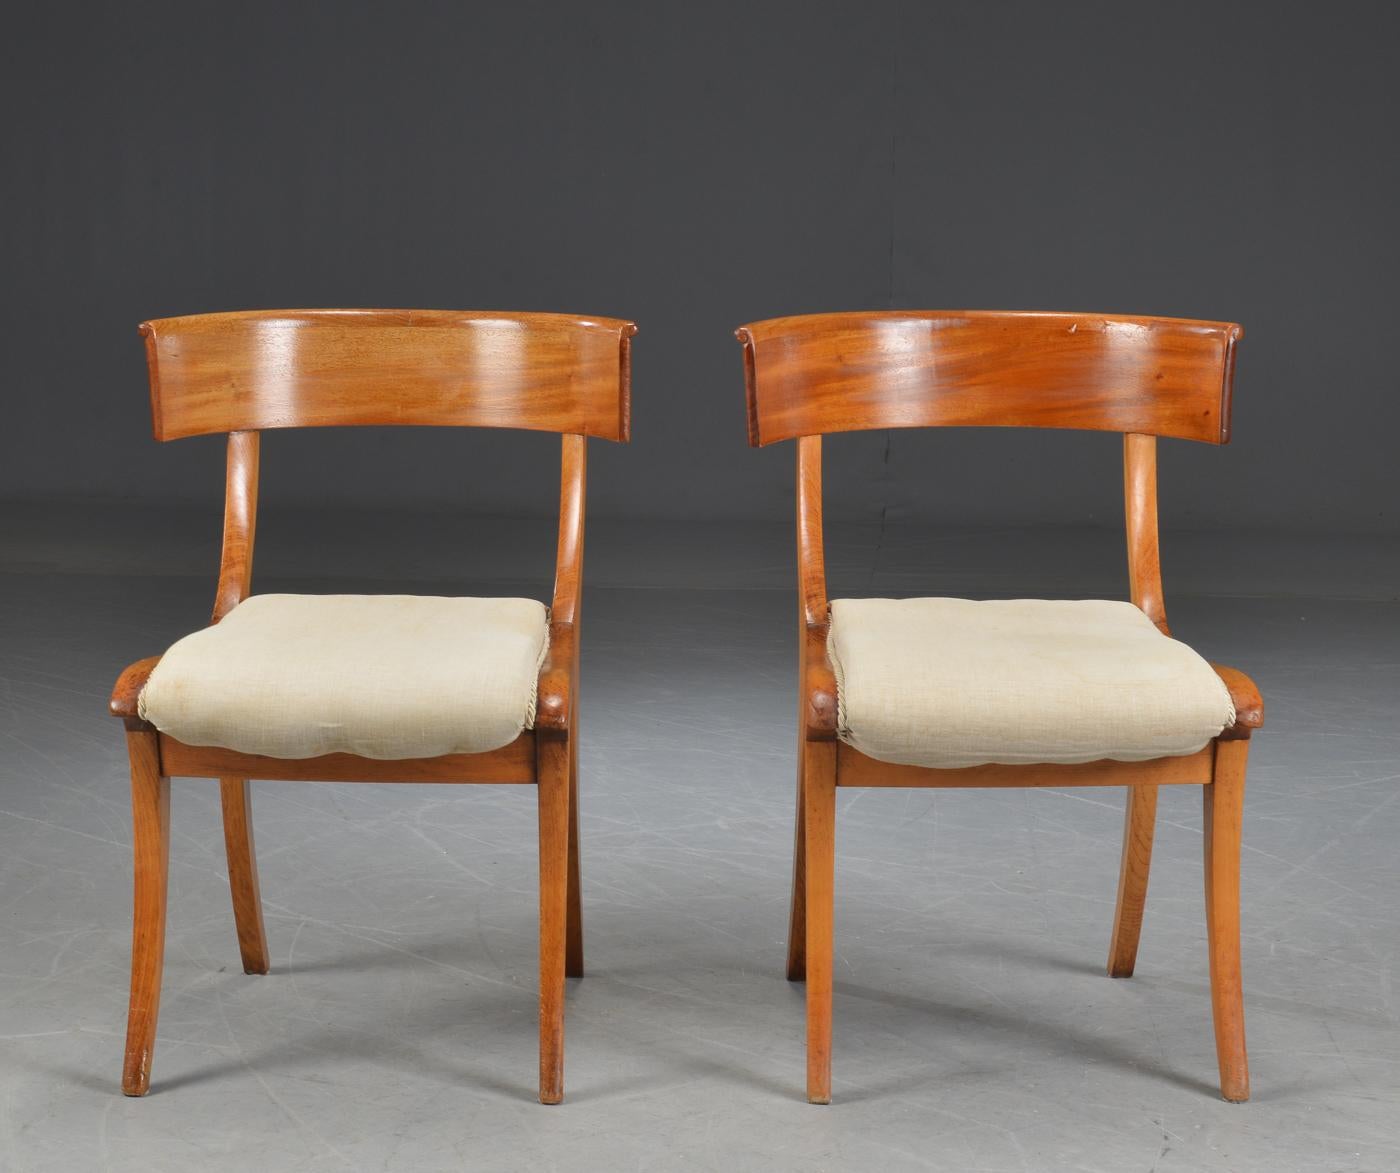 Pair Klismo chairs with curved mahogany lacquered frame. Seats upholstered in light beige upholstery fabric.